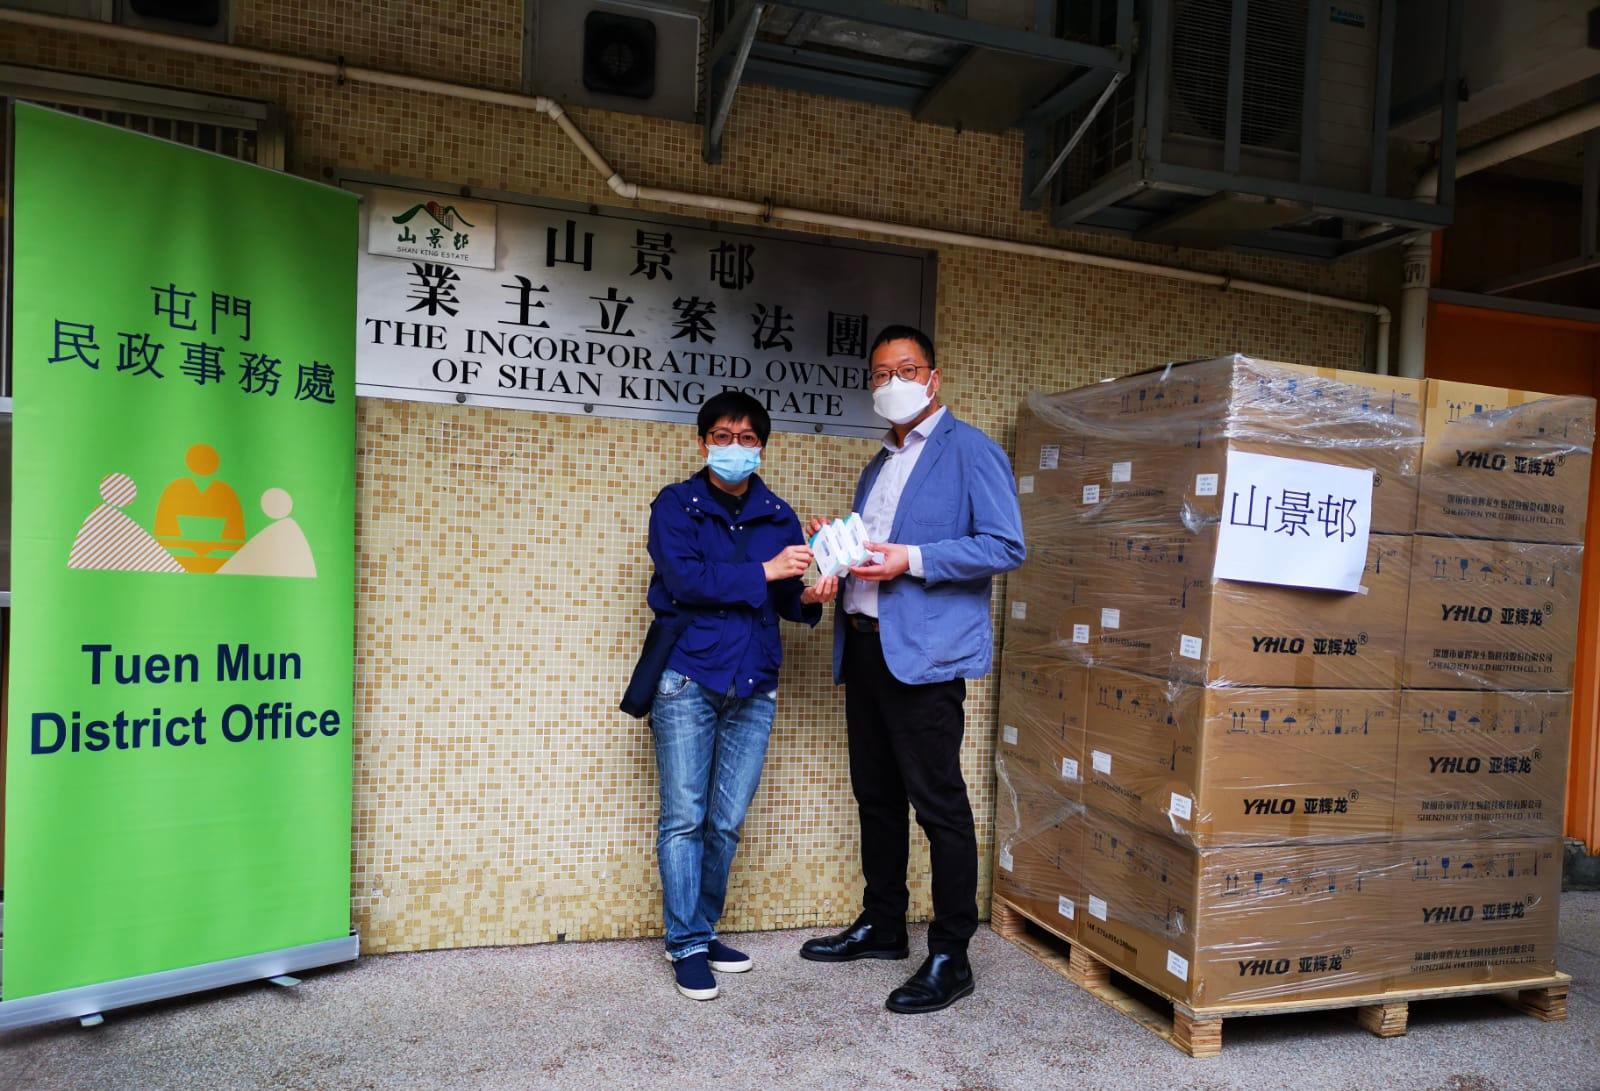 The Tuen Mun District Office today (April 19) distributed COVID-19 rapid test kits to households, cleansing workers and property management staff living and working in Shan King Estate for voluntary testing through the property management company.